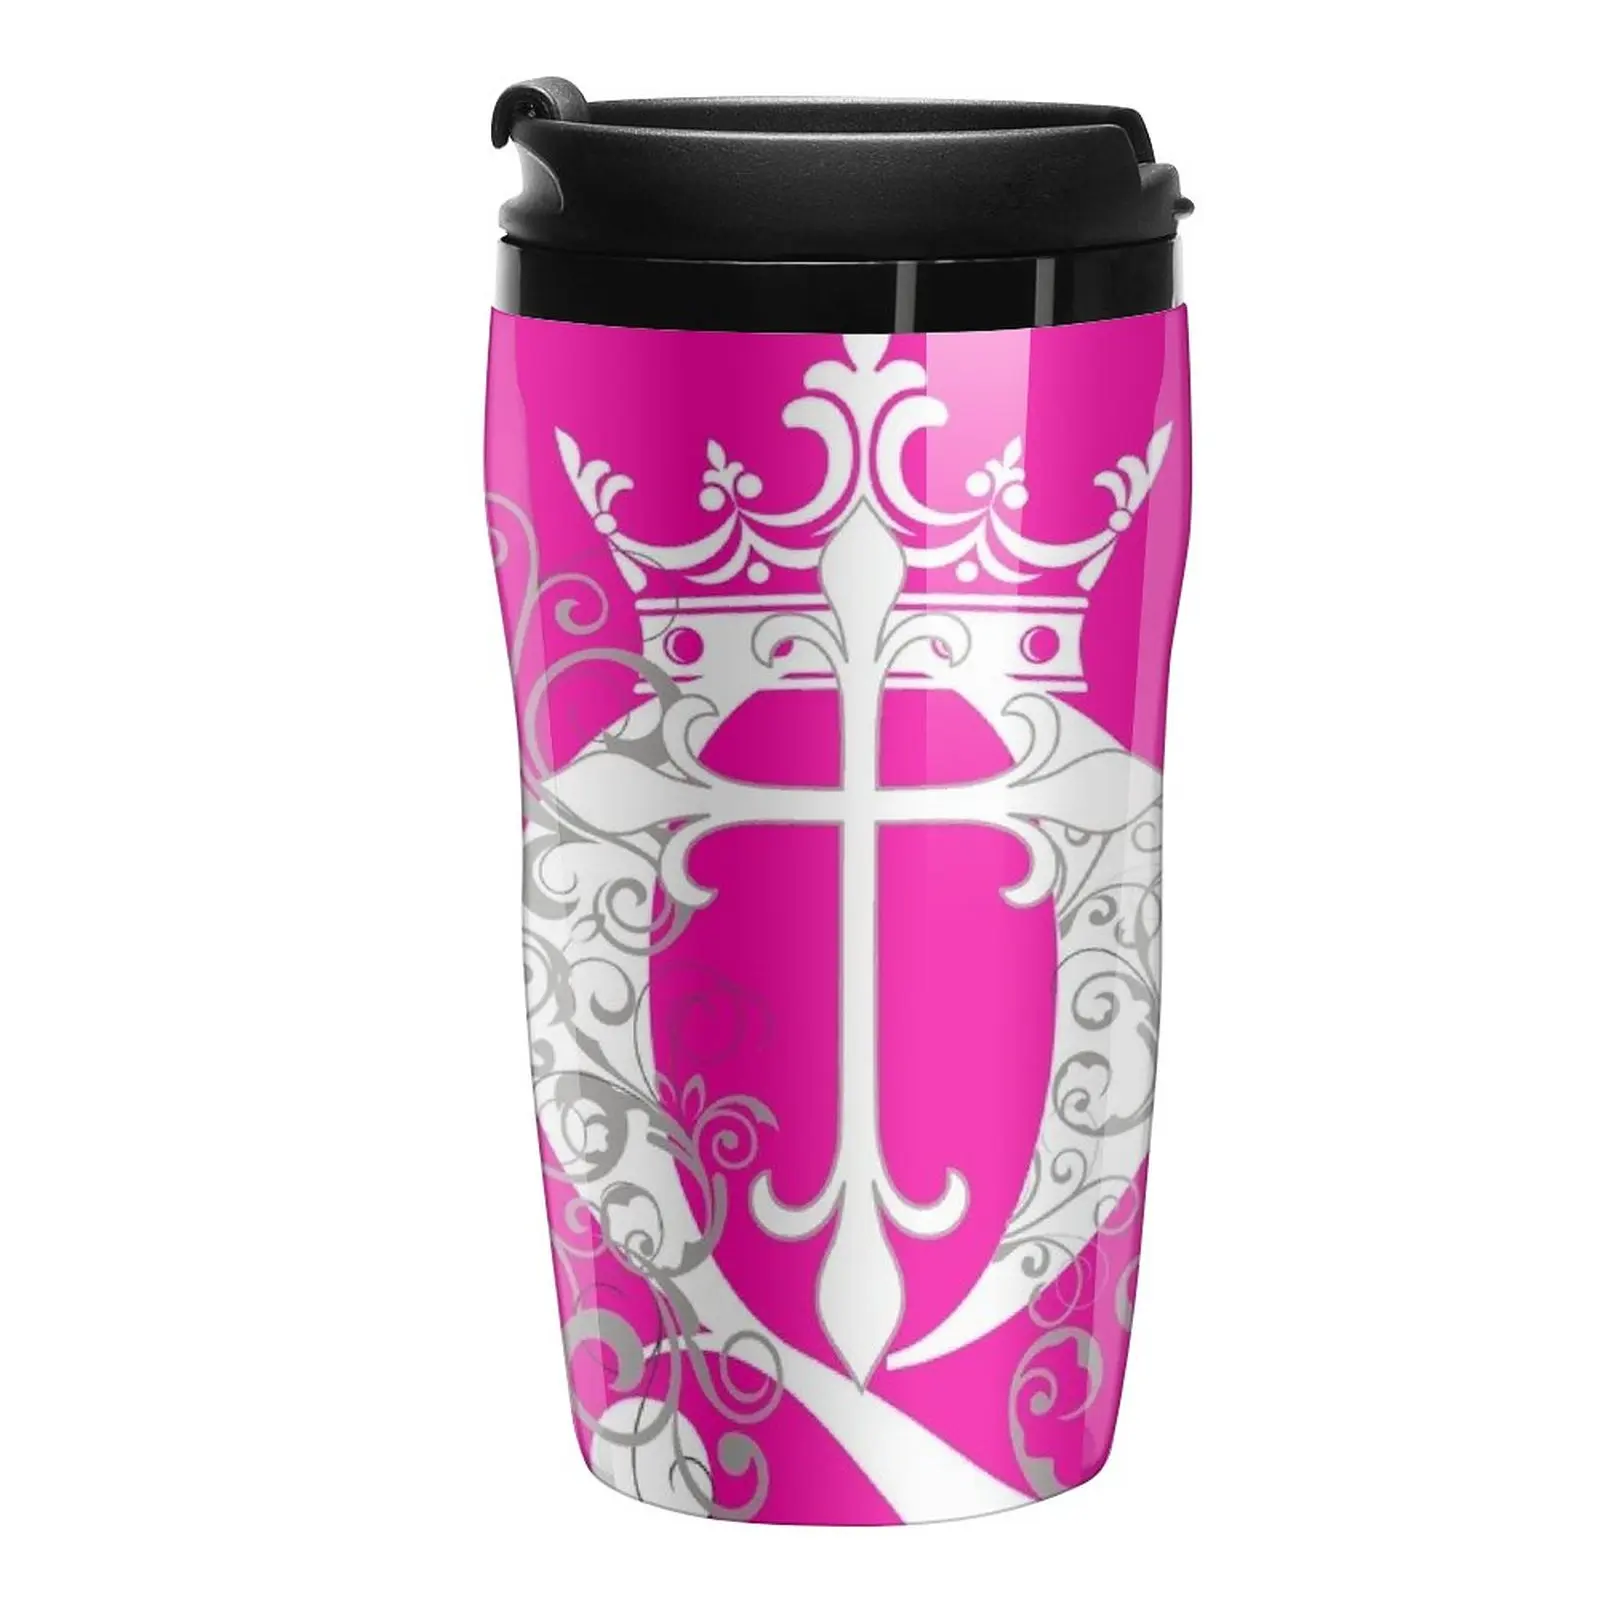 

New Pink Cup Cross Q Crown in White & Gray Travel Coffee Mug Original And Funny Cups To Give Away Coffee Bowls Mug For Tea